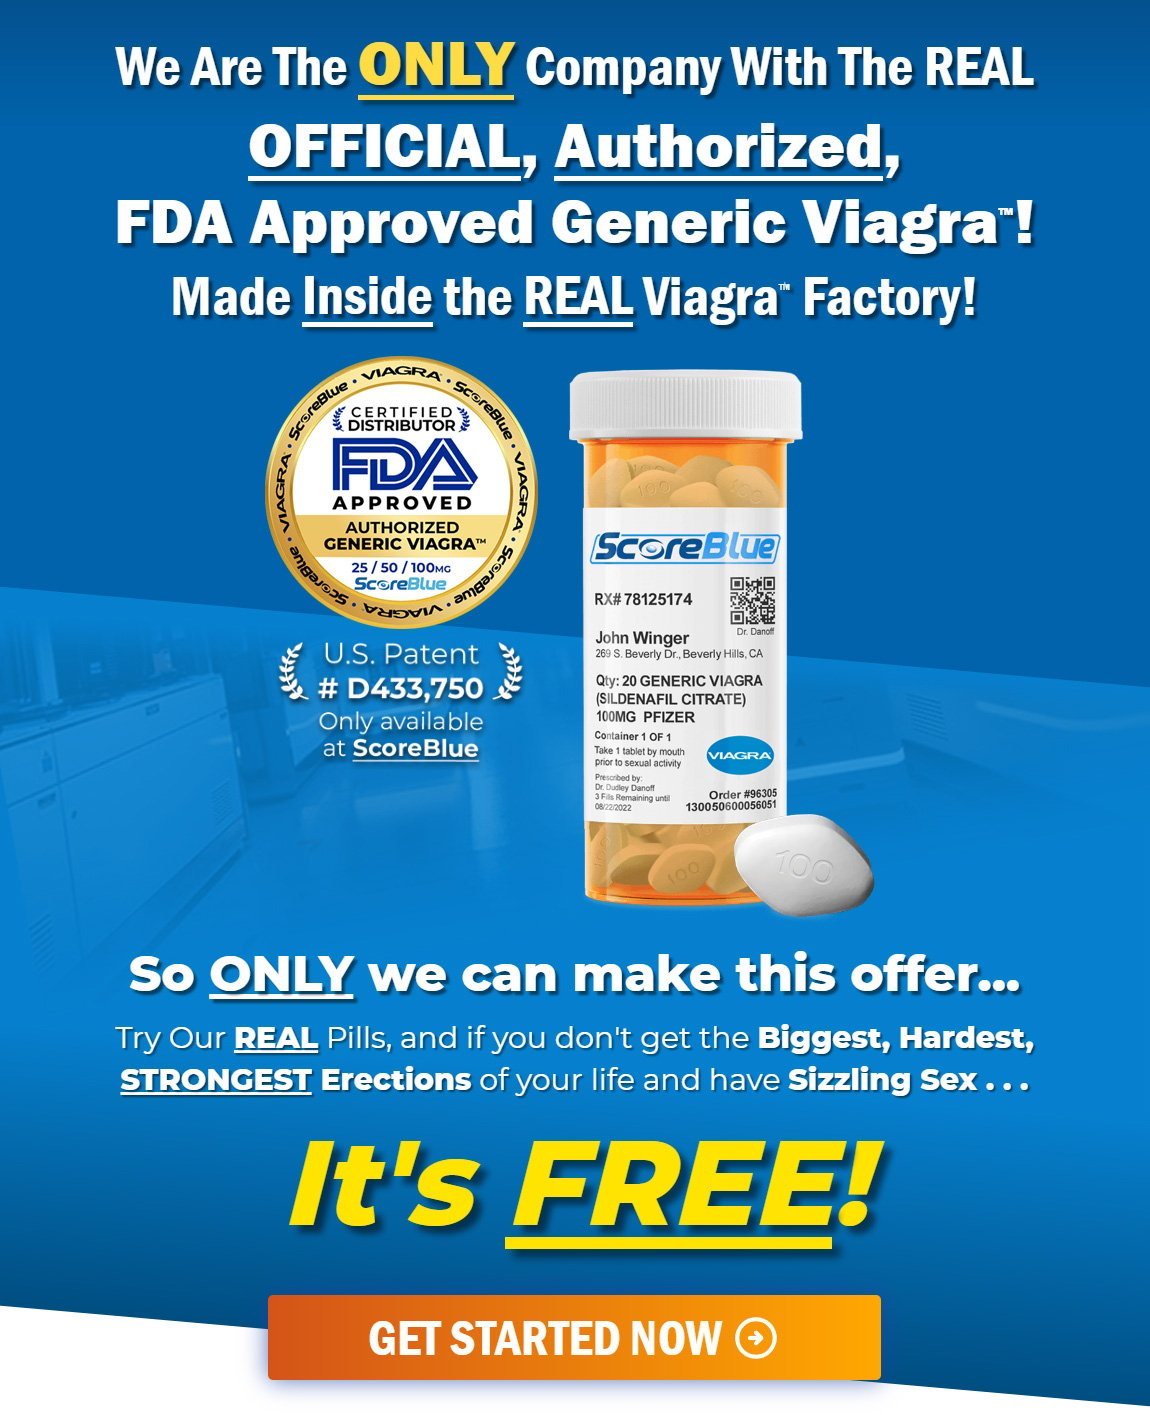 /we are the only company with the real official authorized fda approved generic viagra